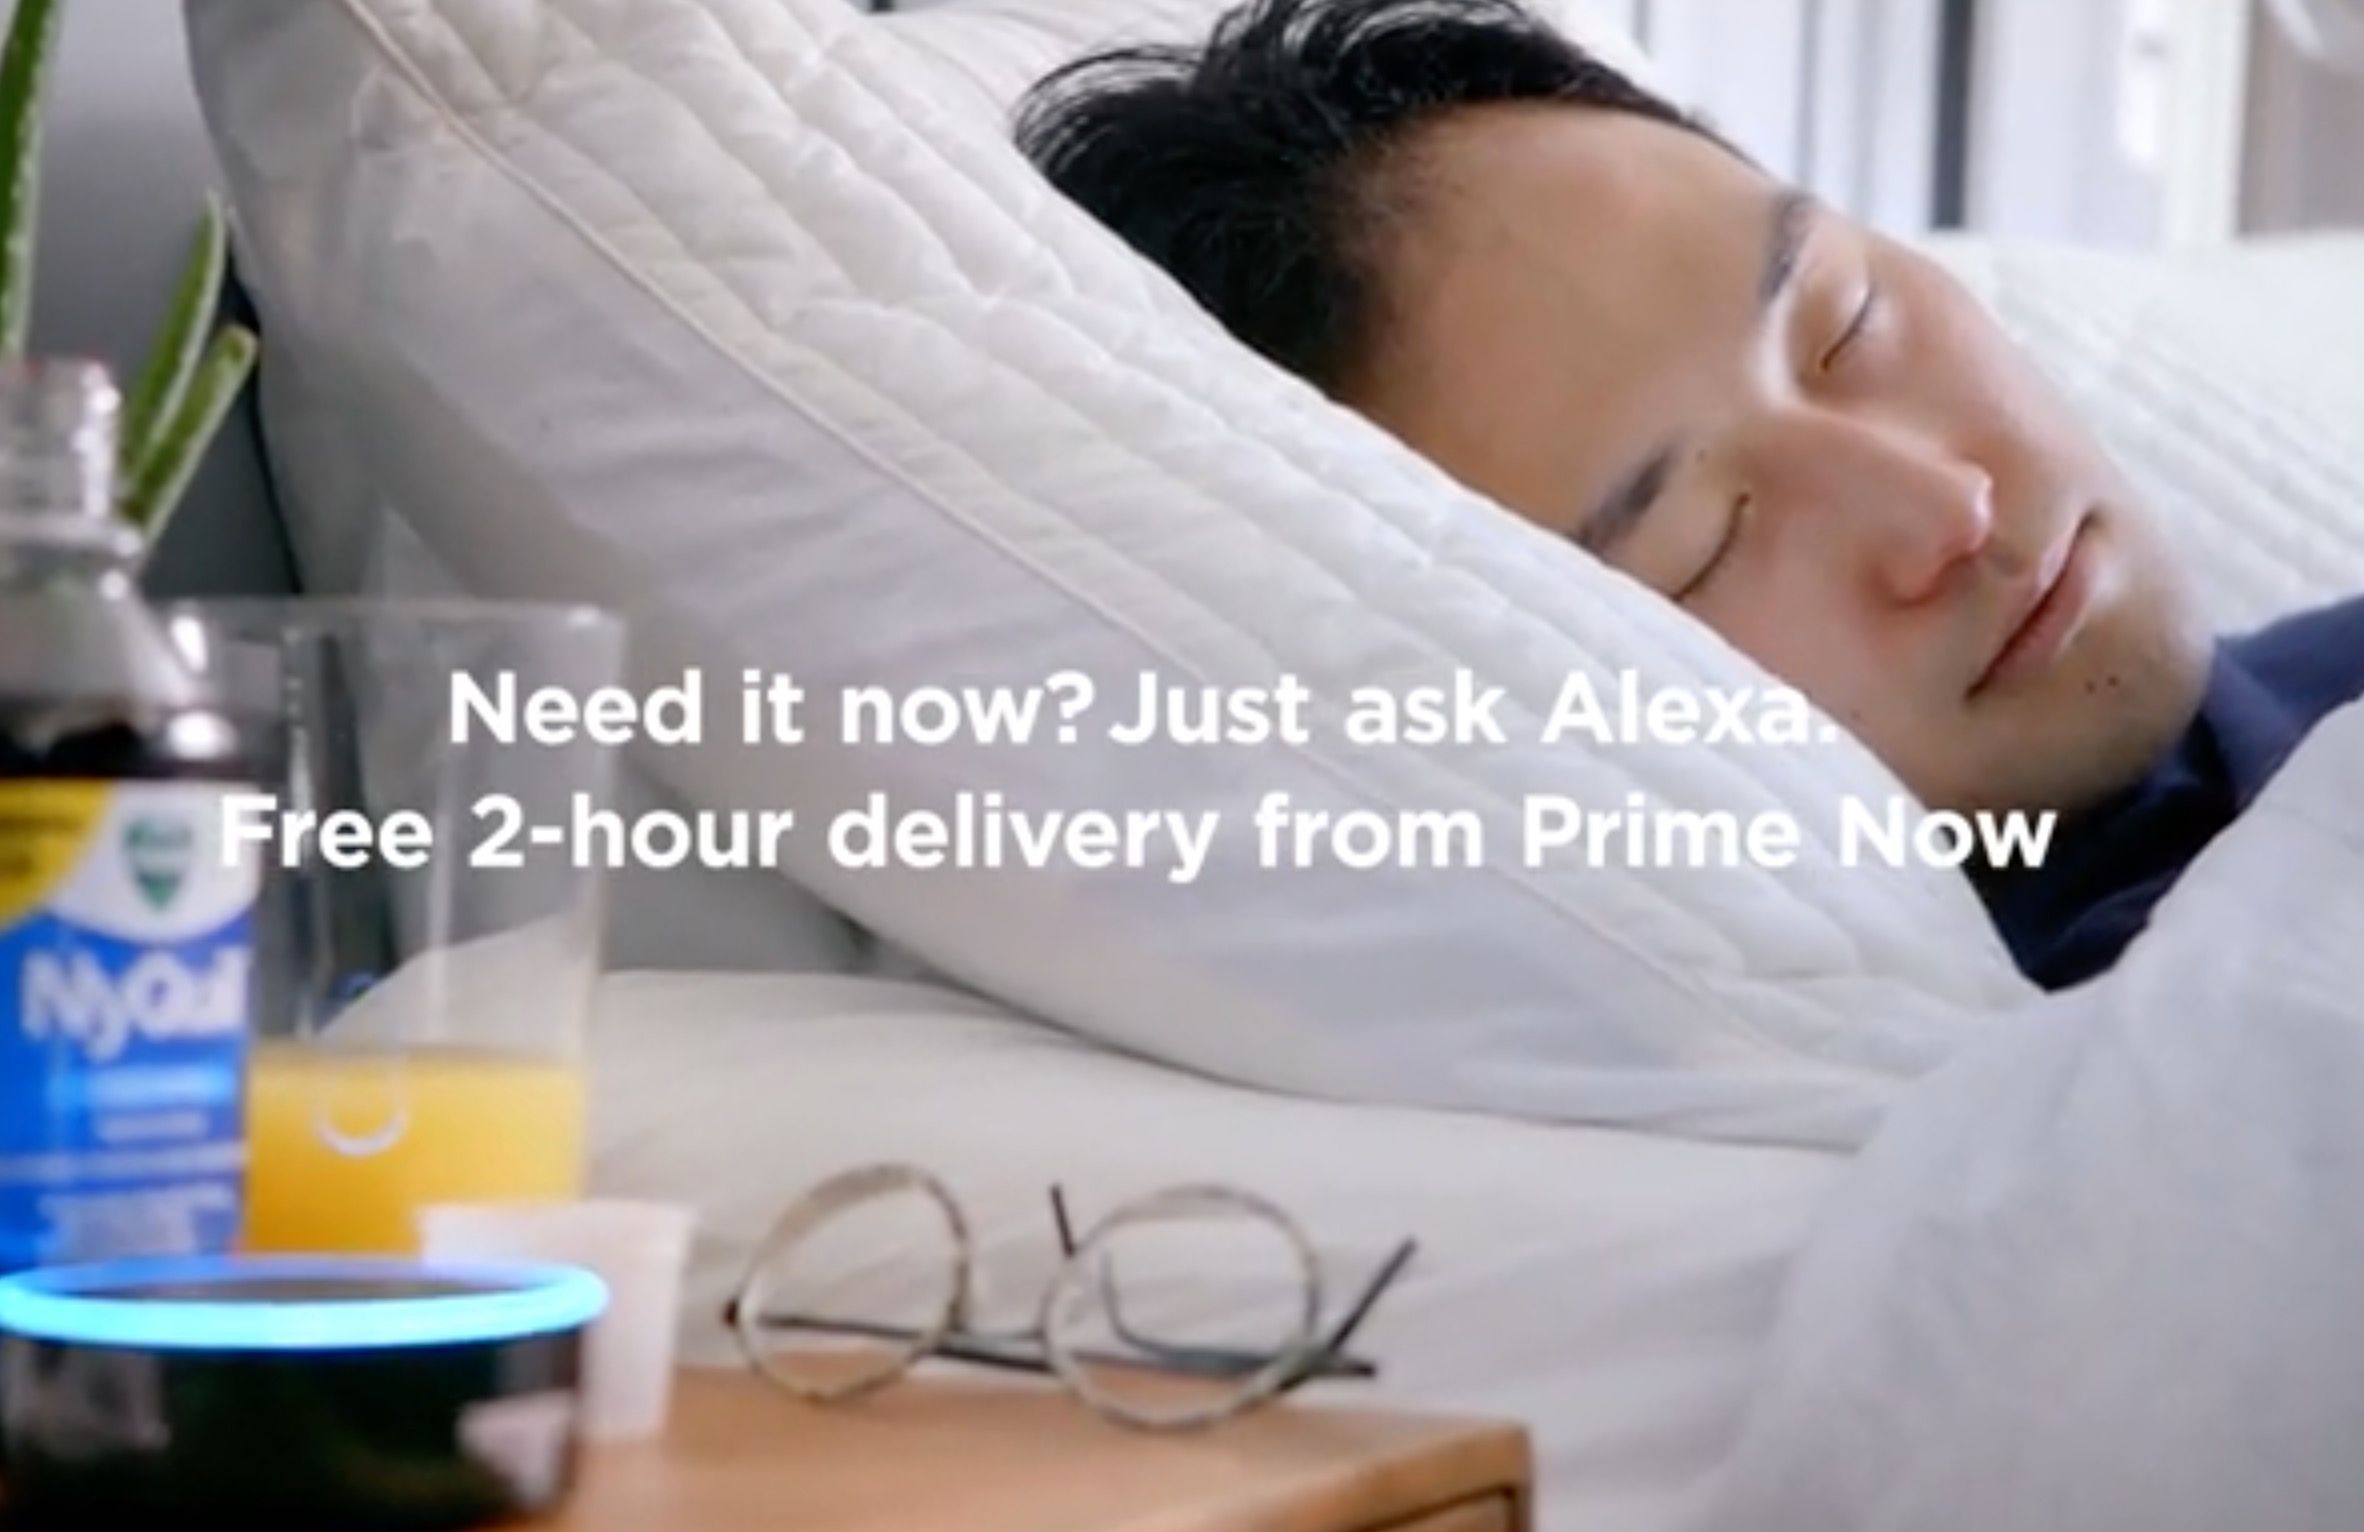 amazon alexa adds prime now how to get fast deliveries with your voice image 1